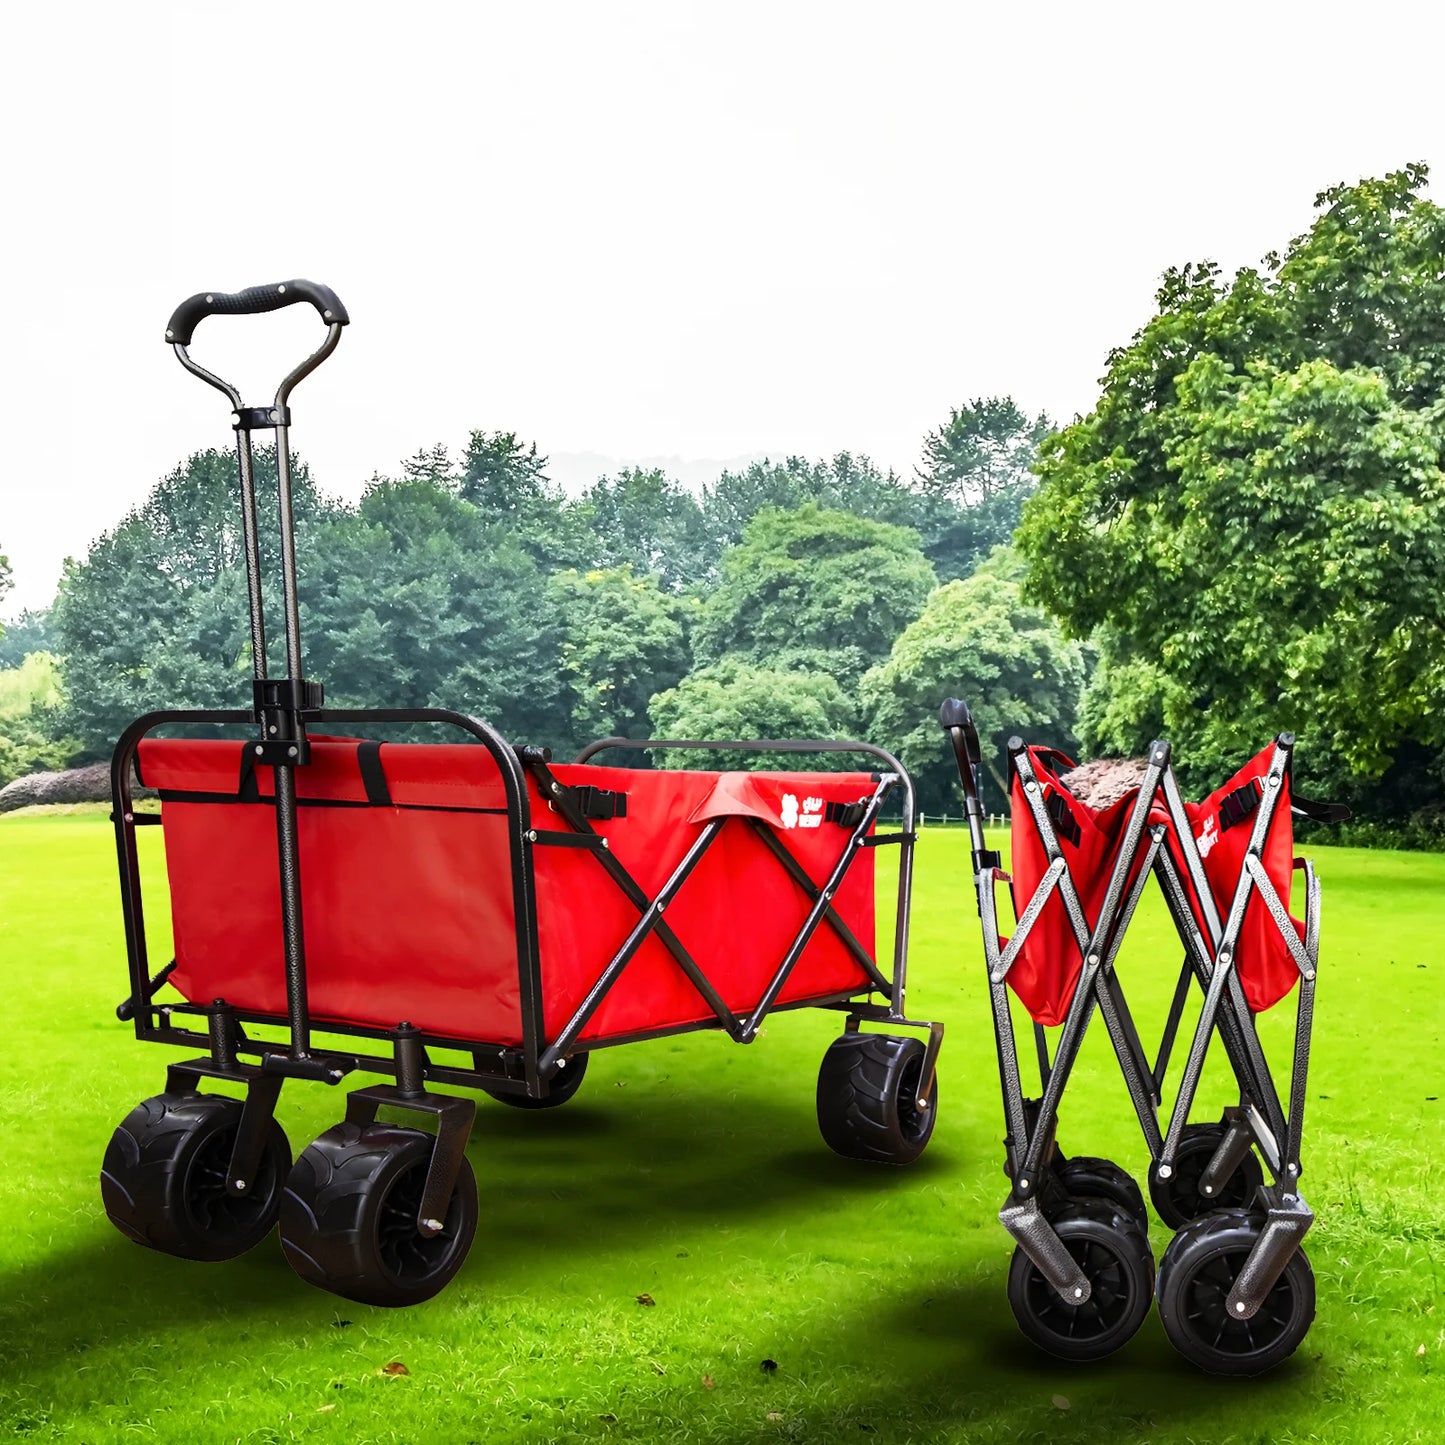 80KG Outdoor Garden Trolley with Heavy Duty Wheels - Red | Push Cart with Telescopic Handles